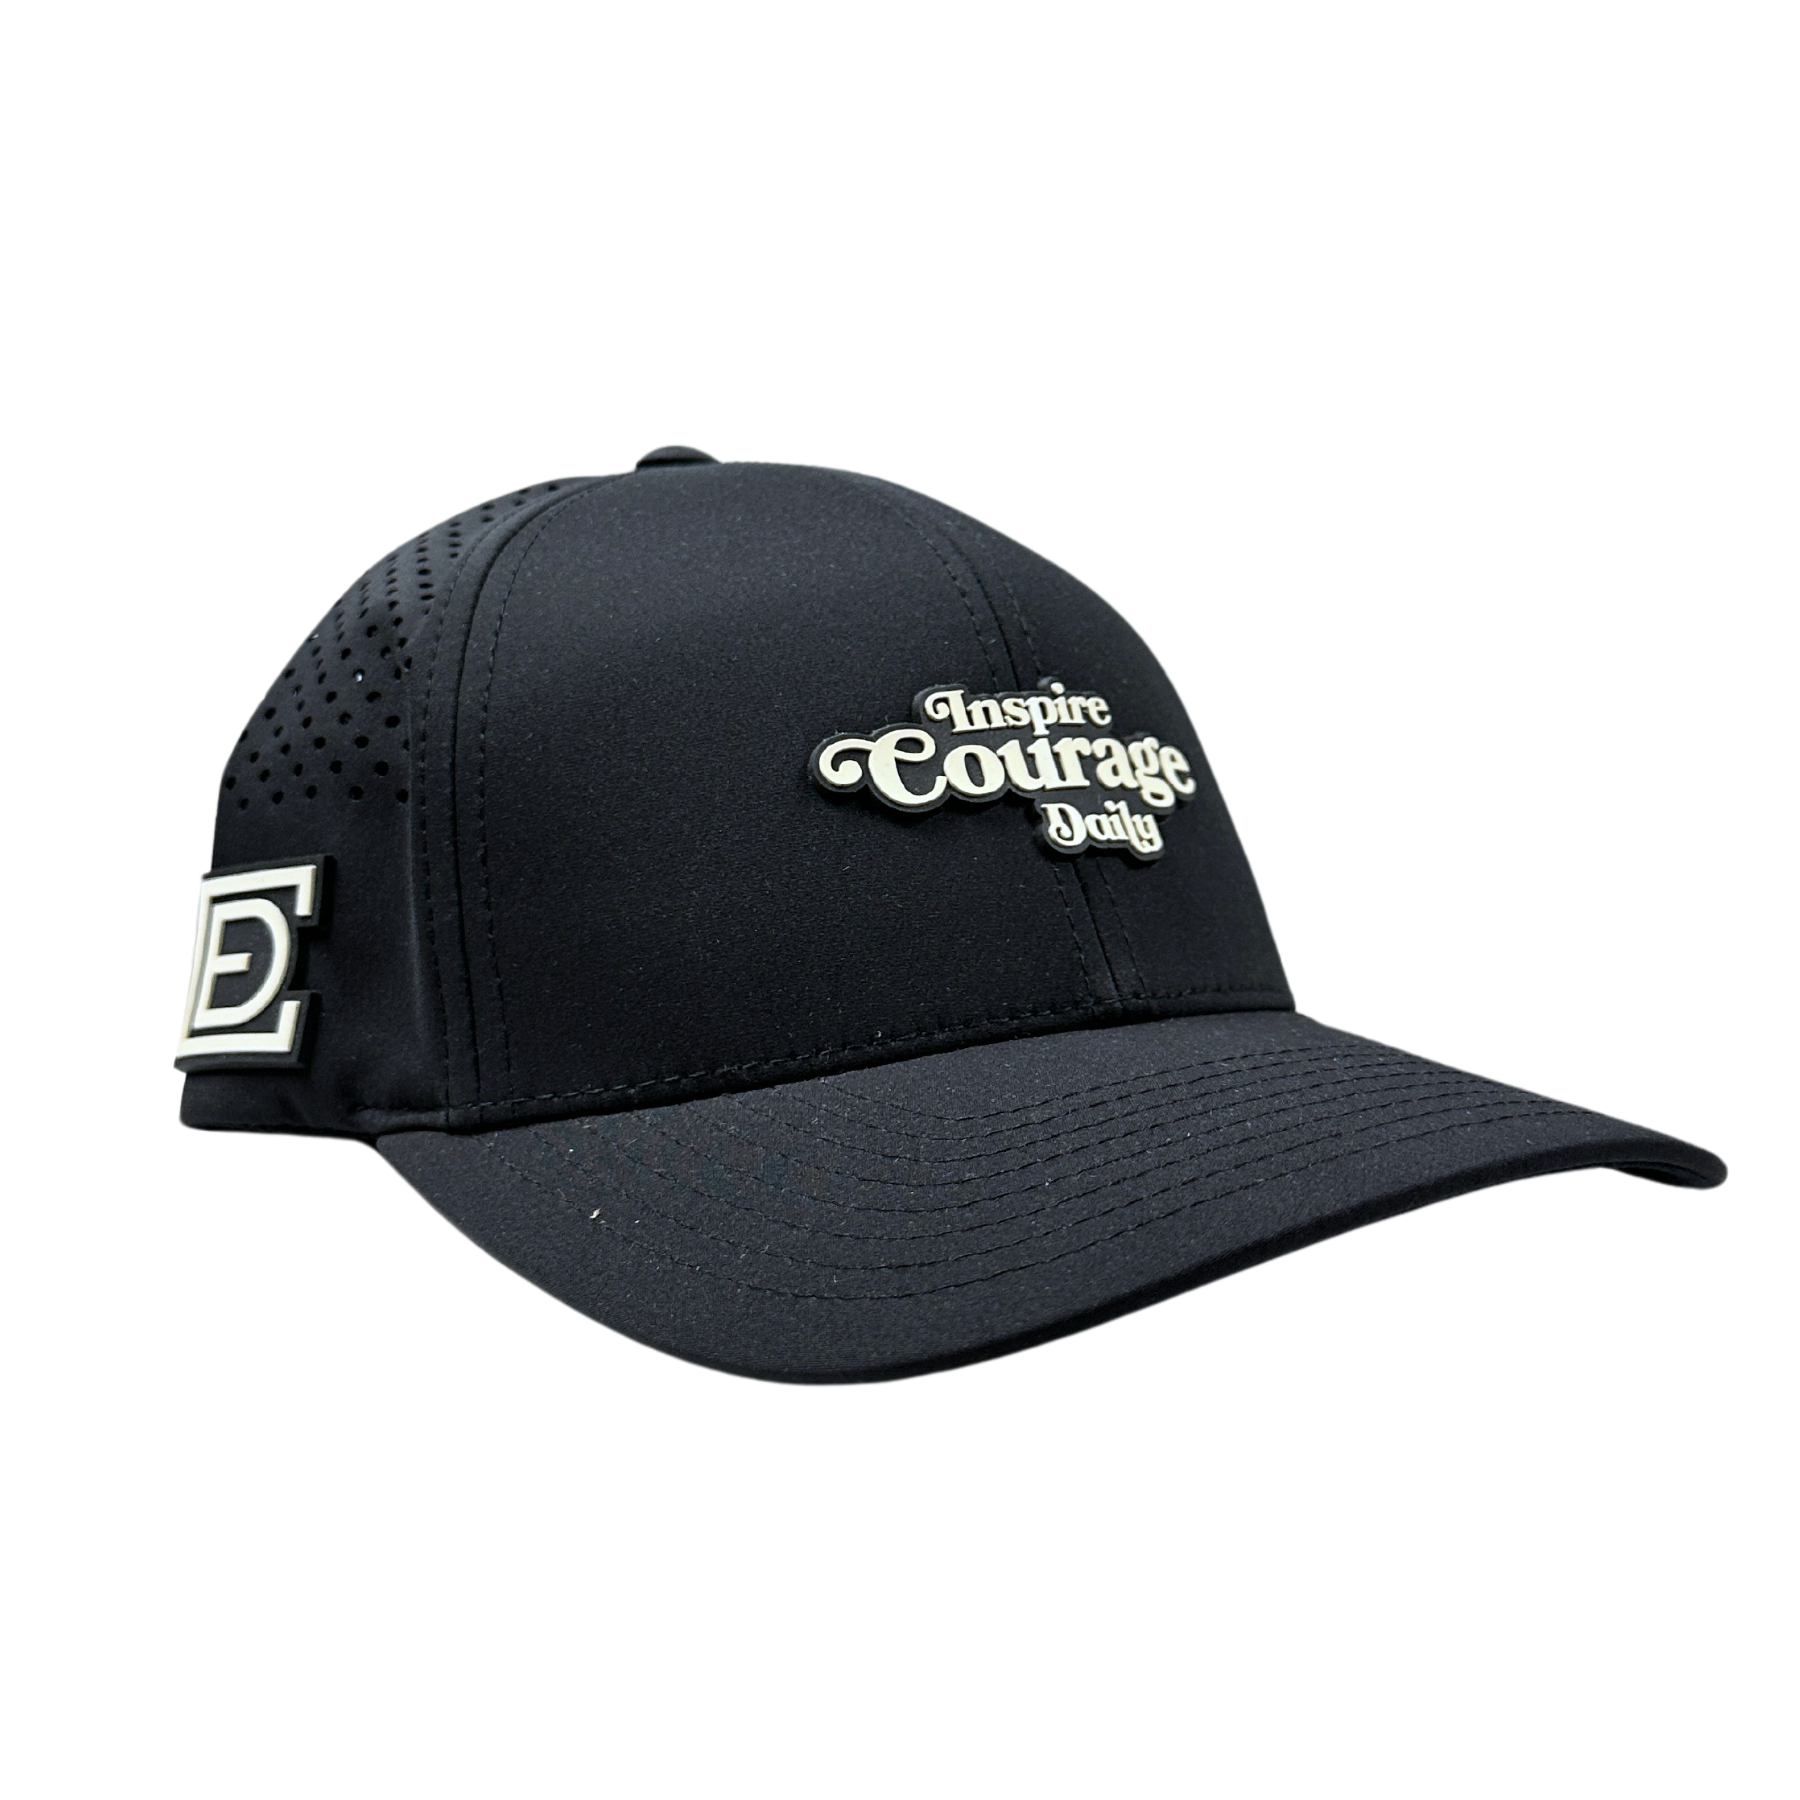 Inspire Courage Daily Black Adjustable Hat